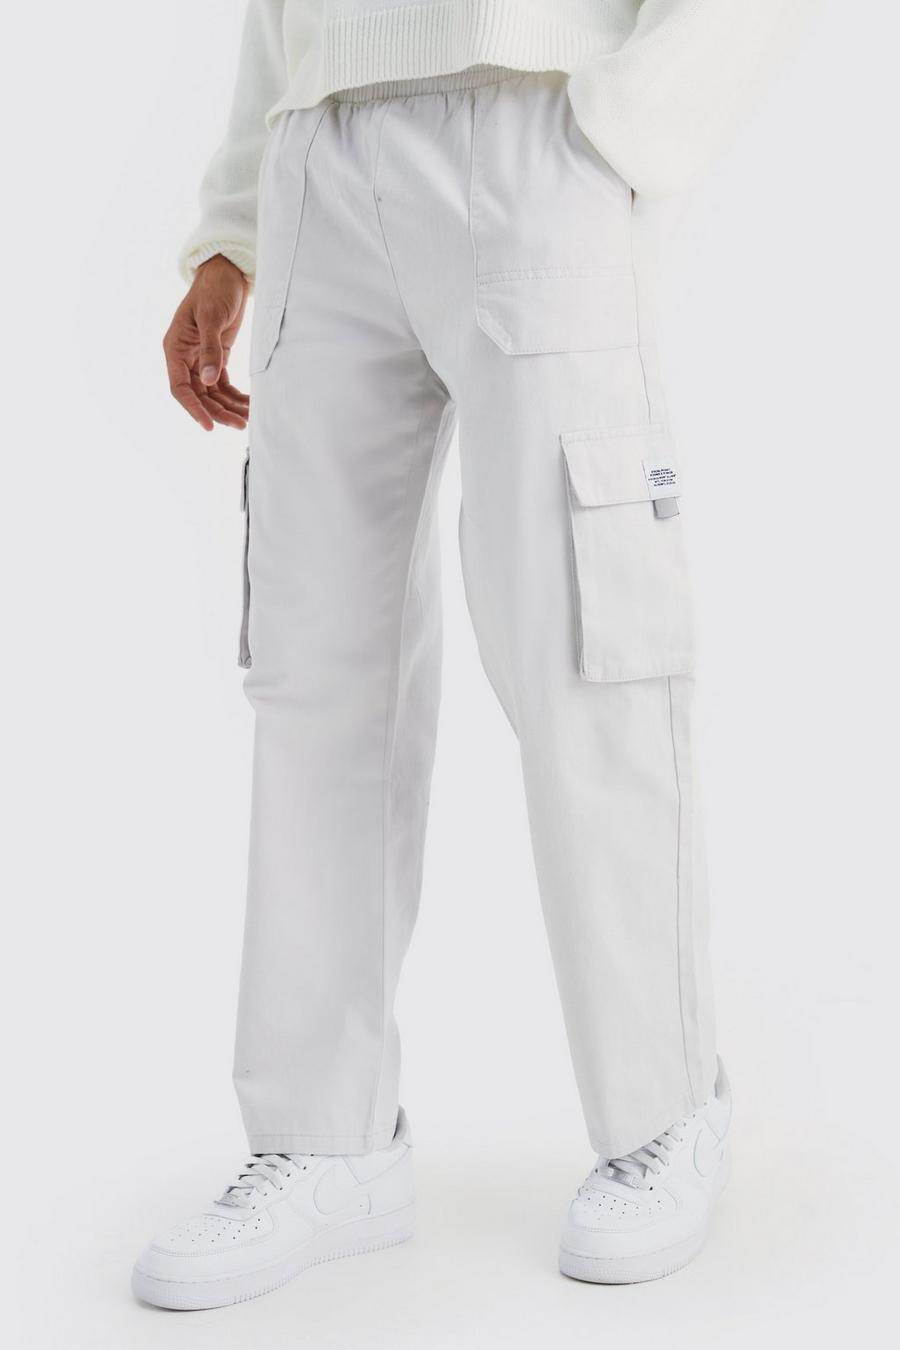 Slate Elasticated Waist Relaxed Fit Cargo Trouser